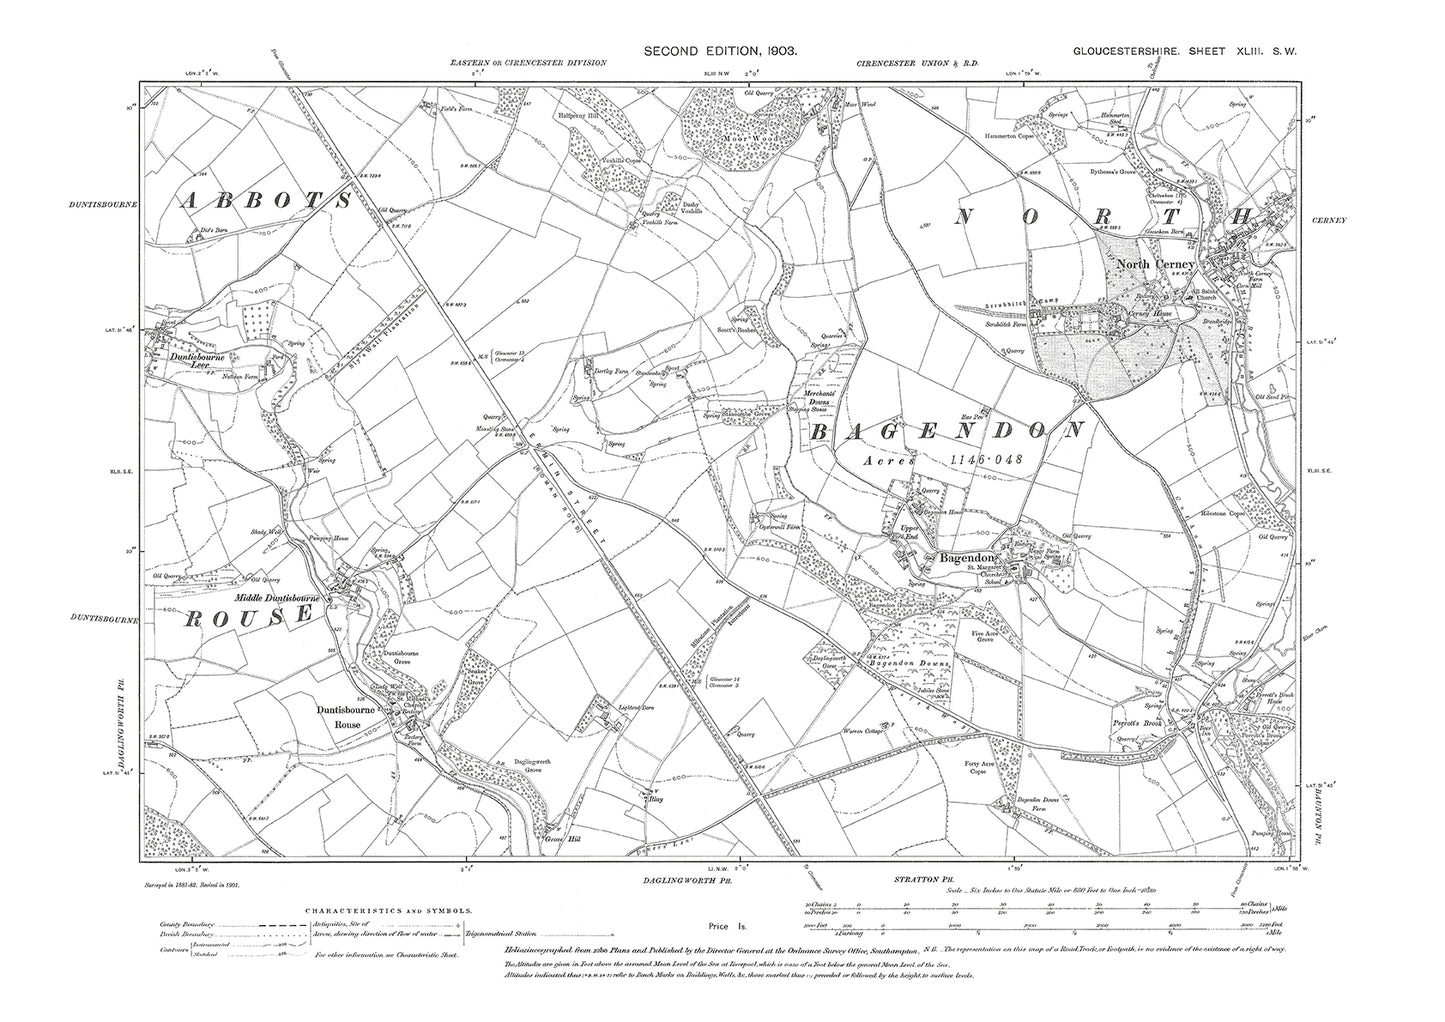 Old OS map dated 1903, showing North Cerney, Bagendon, Duntisbourne in Gloucestershire - 43SW